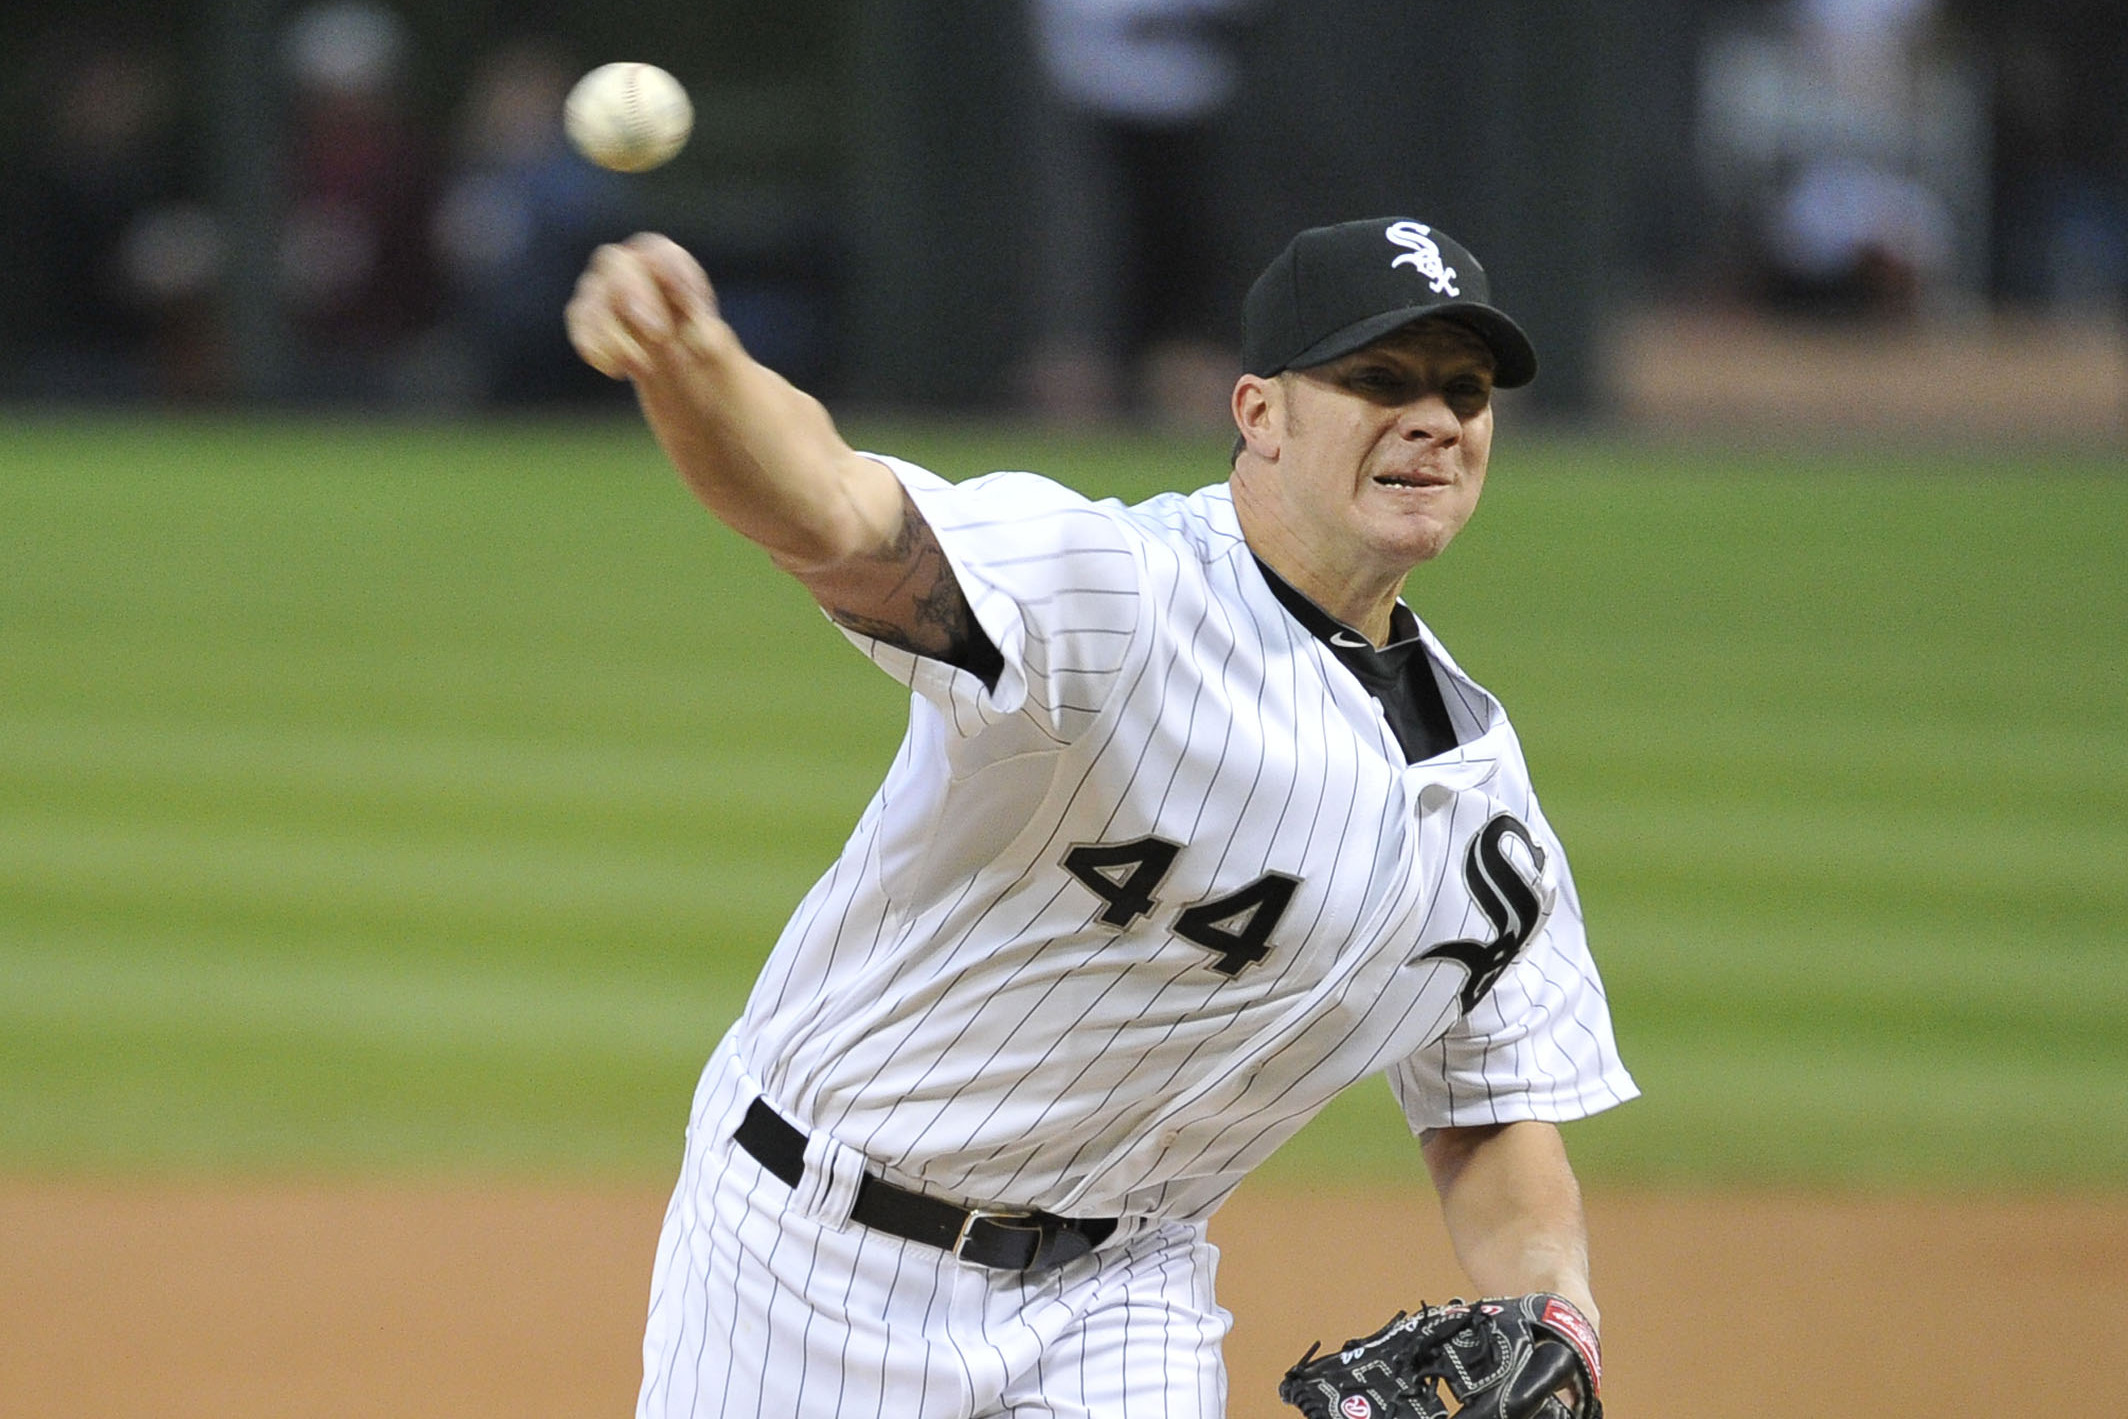 White Sox Pitcher Jake Peavy Honors a Longtime Friend and